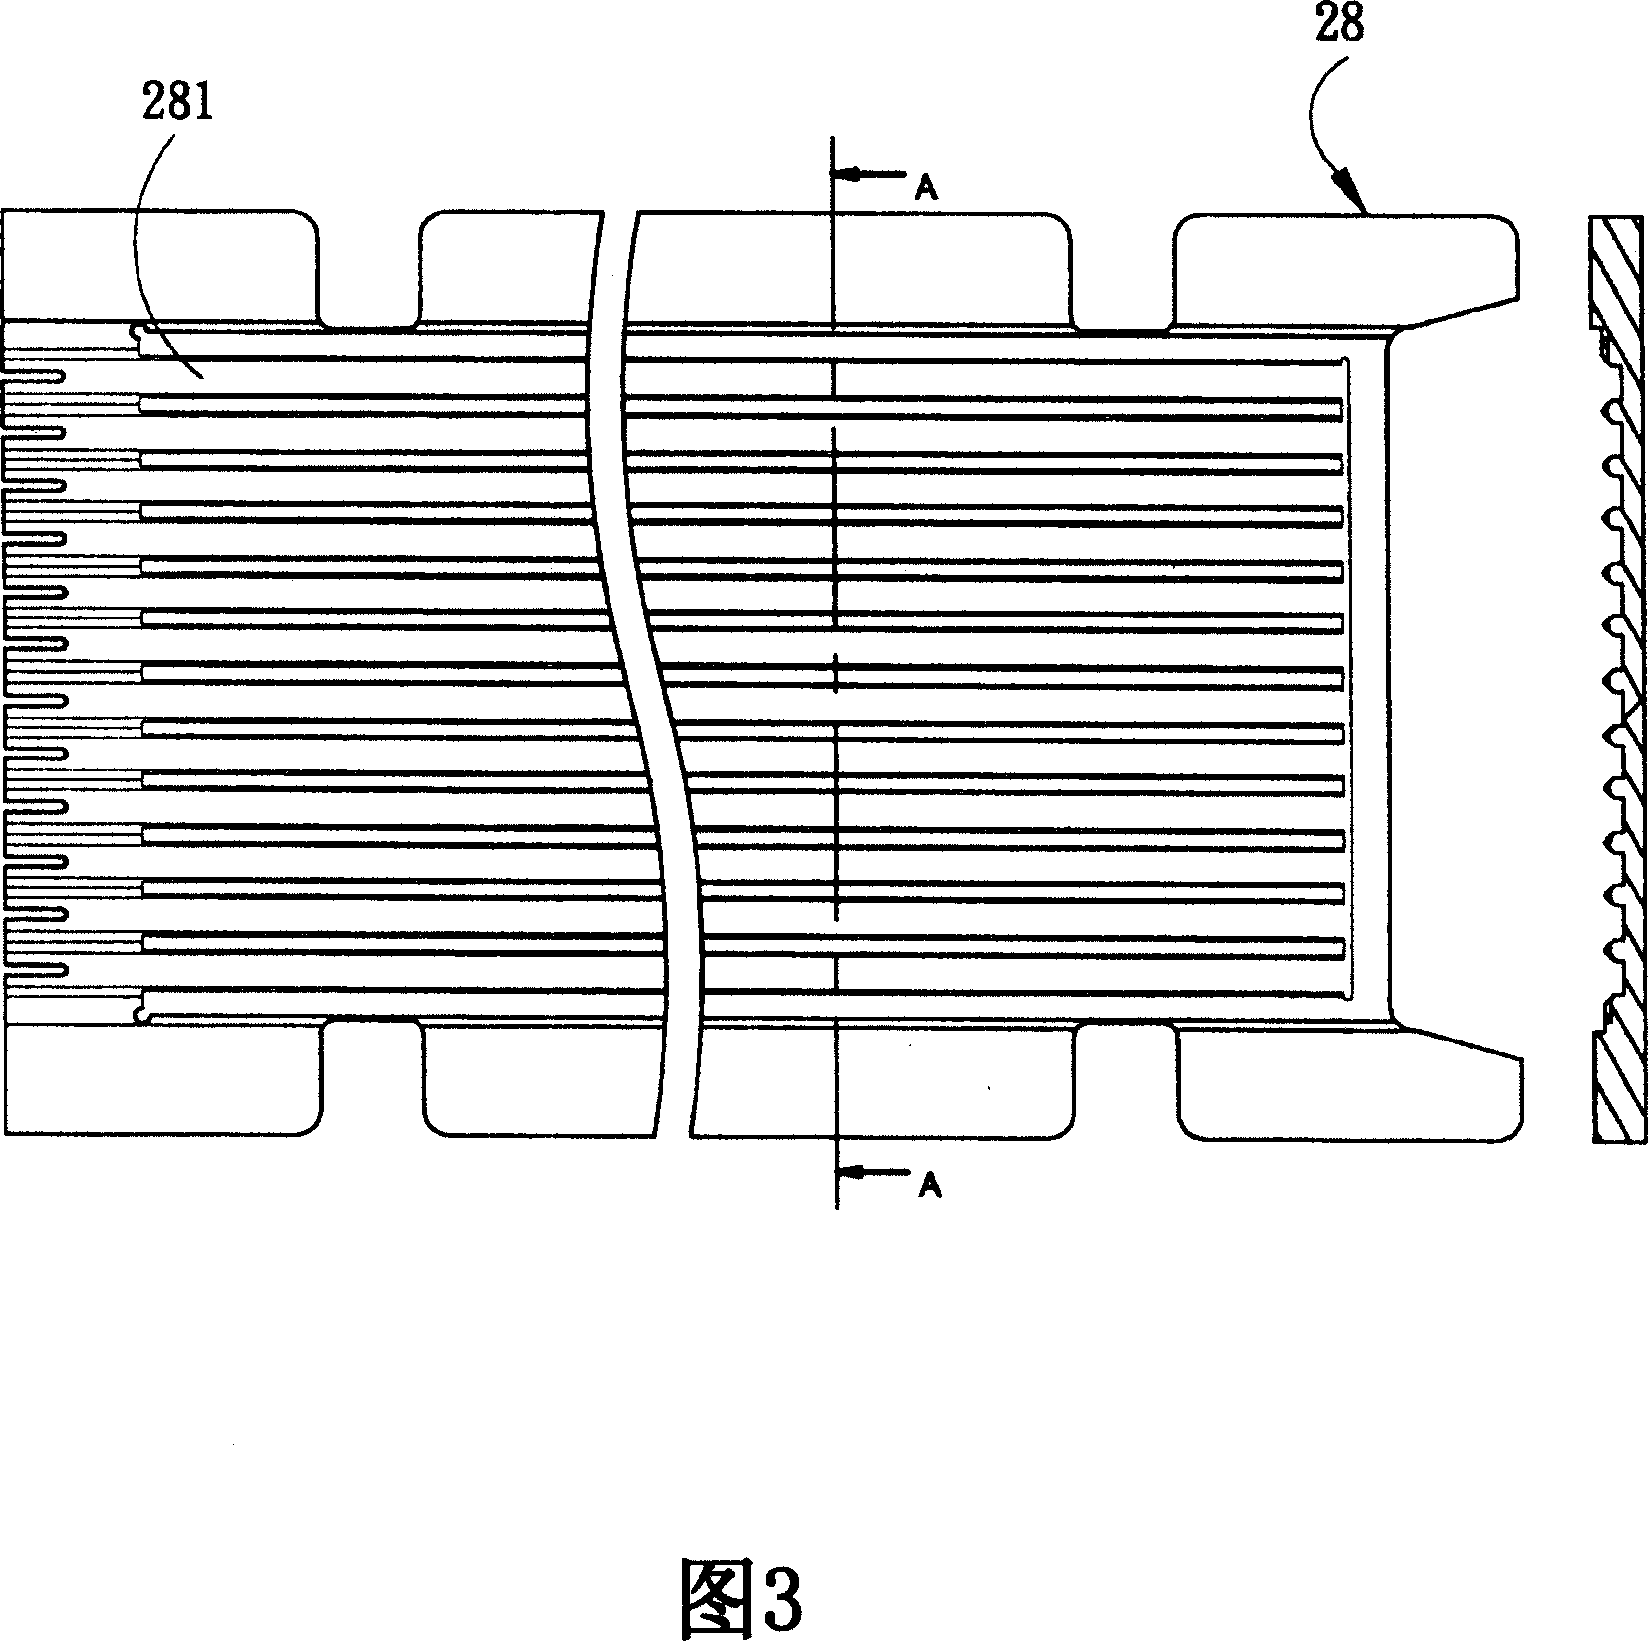 Container conversion device for semi-conductor packaging element